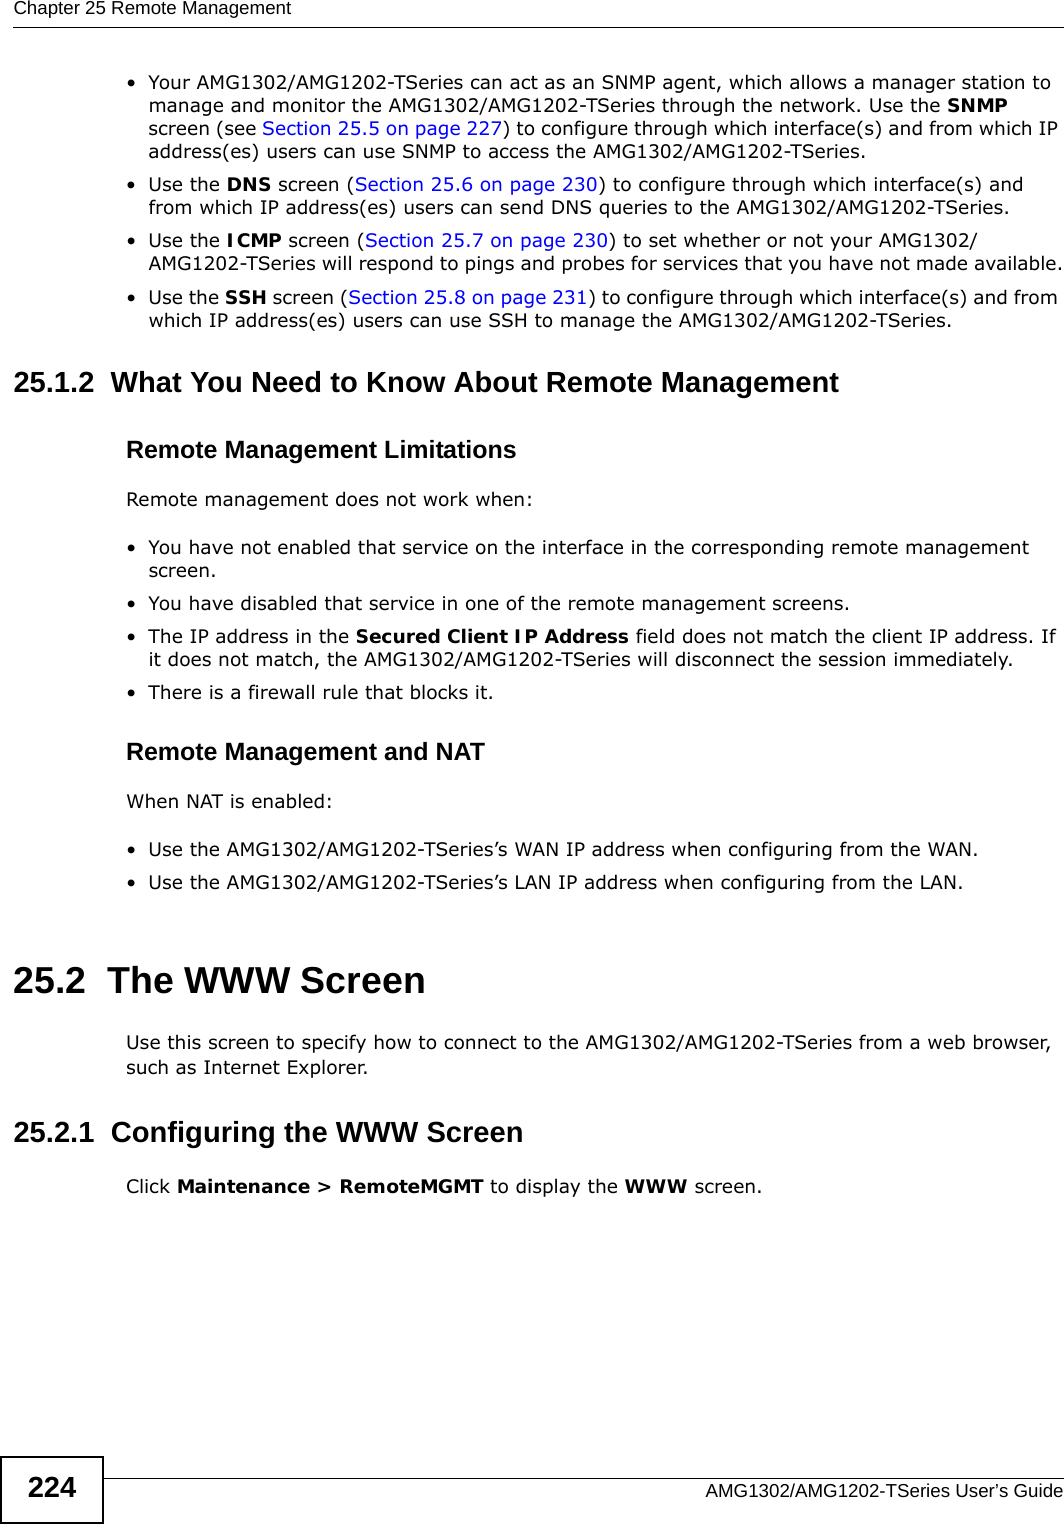 Chapter 25 Remote ManagementAMG1302/AMG1202-TSeries User’s Guide224• Your AMG1302/AMG1202-TSeries can act as an SNMP agent, which allows a manager station to manage and monitor the AMG1302/AMG1202-TSeries through the network. Use the SNMP screen (see Section 25.5 on page 227) to configure through which interface(s) and from which IP address(es) users can use SNMP to access the AMG1302/AMG1202-TSeries.•Use the DNS screen (Section 25.6 on page 230) to configure through which interface(s) and from which IP address(es) users can send DNS queries to the AMG1302/AMG1202-TSeries.•Use the ICMP screen (Section 25.7 on page 230) to set whether or not your AMG1302/AMG1202-TSeries will respond to pings and probes for services that you have not made available.•Use the SSH screen (Section 25.8 on page 231) to configure through which interface(s) and from which IP address(es) users can use SSH to manage the AMG1302/AMG1202-TSeries.25.1.2  What You Need to Know About Remote ManagementRemote Management LimitationsRemote management does not work when:• You have not enabled that service on the interface in the corresponding remote management screen.• You have disabled that service in one of the remote management screens.• The IP address in the Secured Client IP Address field does not match the client IP address. If it does not match, the AMG1302/AMG1202-TSeries will disconnect the session immediately.• There is a firewall rule that blocks it.Remote Management and NATWhen NAT is enabled:• Use the AMG1302/AMG1202-TSeries’s WAN IP address when configuring from the WAN. • Use the AMG1302/AMG1202-TSeries’s LAN IP address when configuring from the LAN.25.2  The WWW ScreenUse this screen to specify how to connect to the AMG1302/AMG1202-TSeries from a web browser, such as Internet Explorer. 25.2.1  Configuring the WWW ScreenClick Maintenance &gt; RemoteMGMT to display the WWW screen.